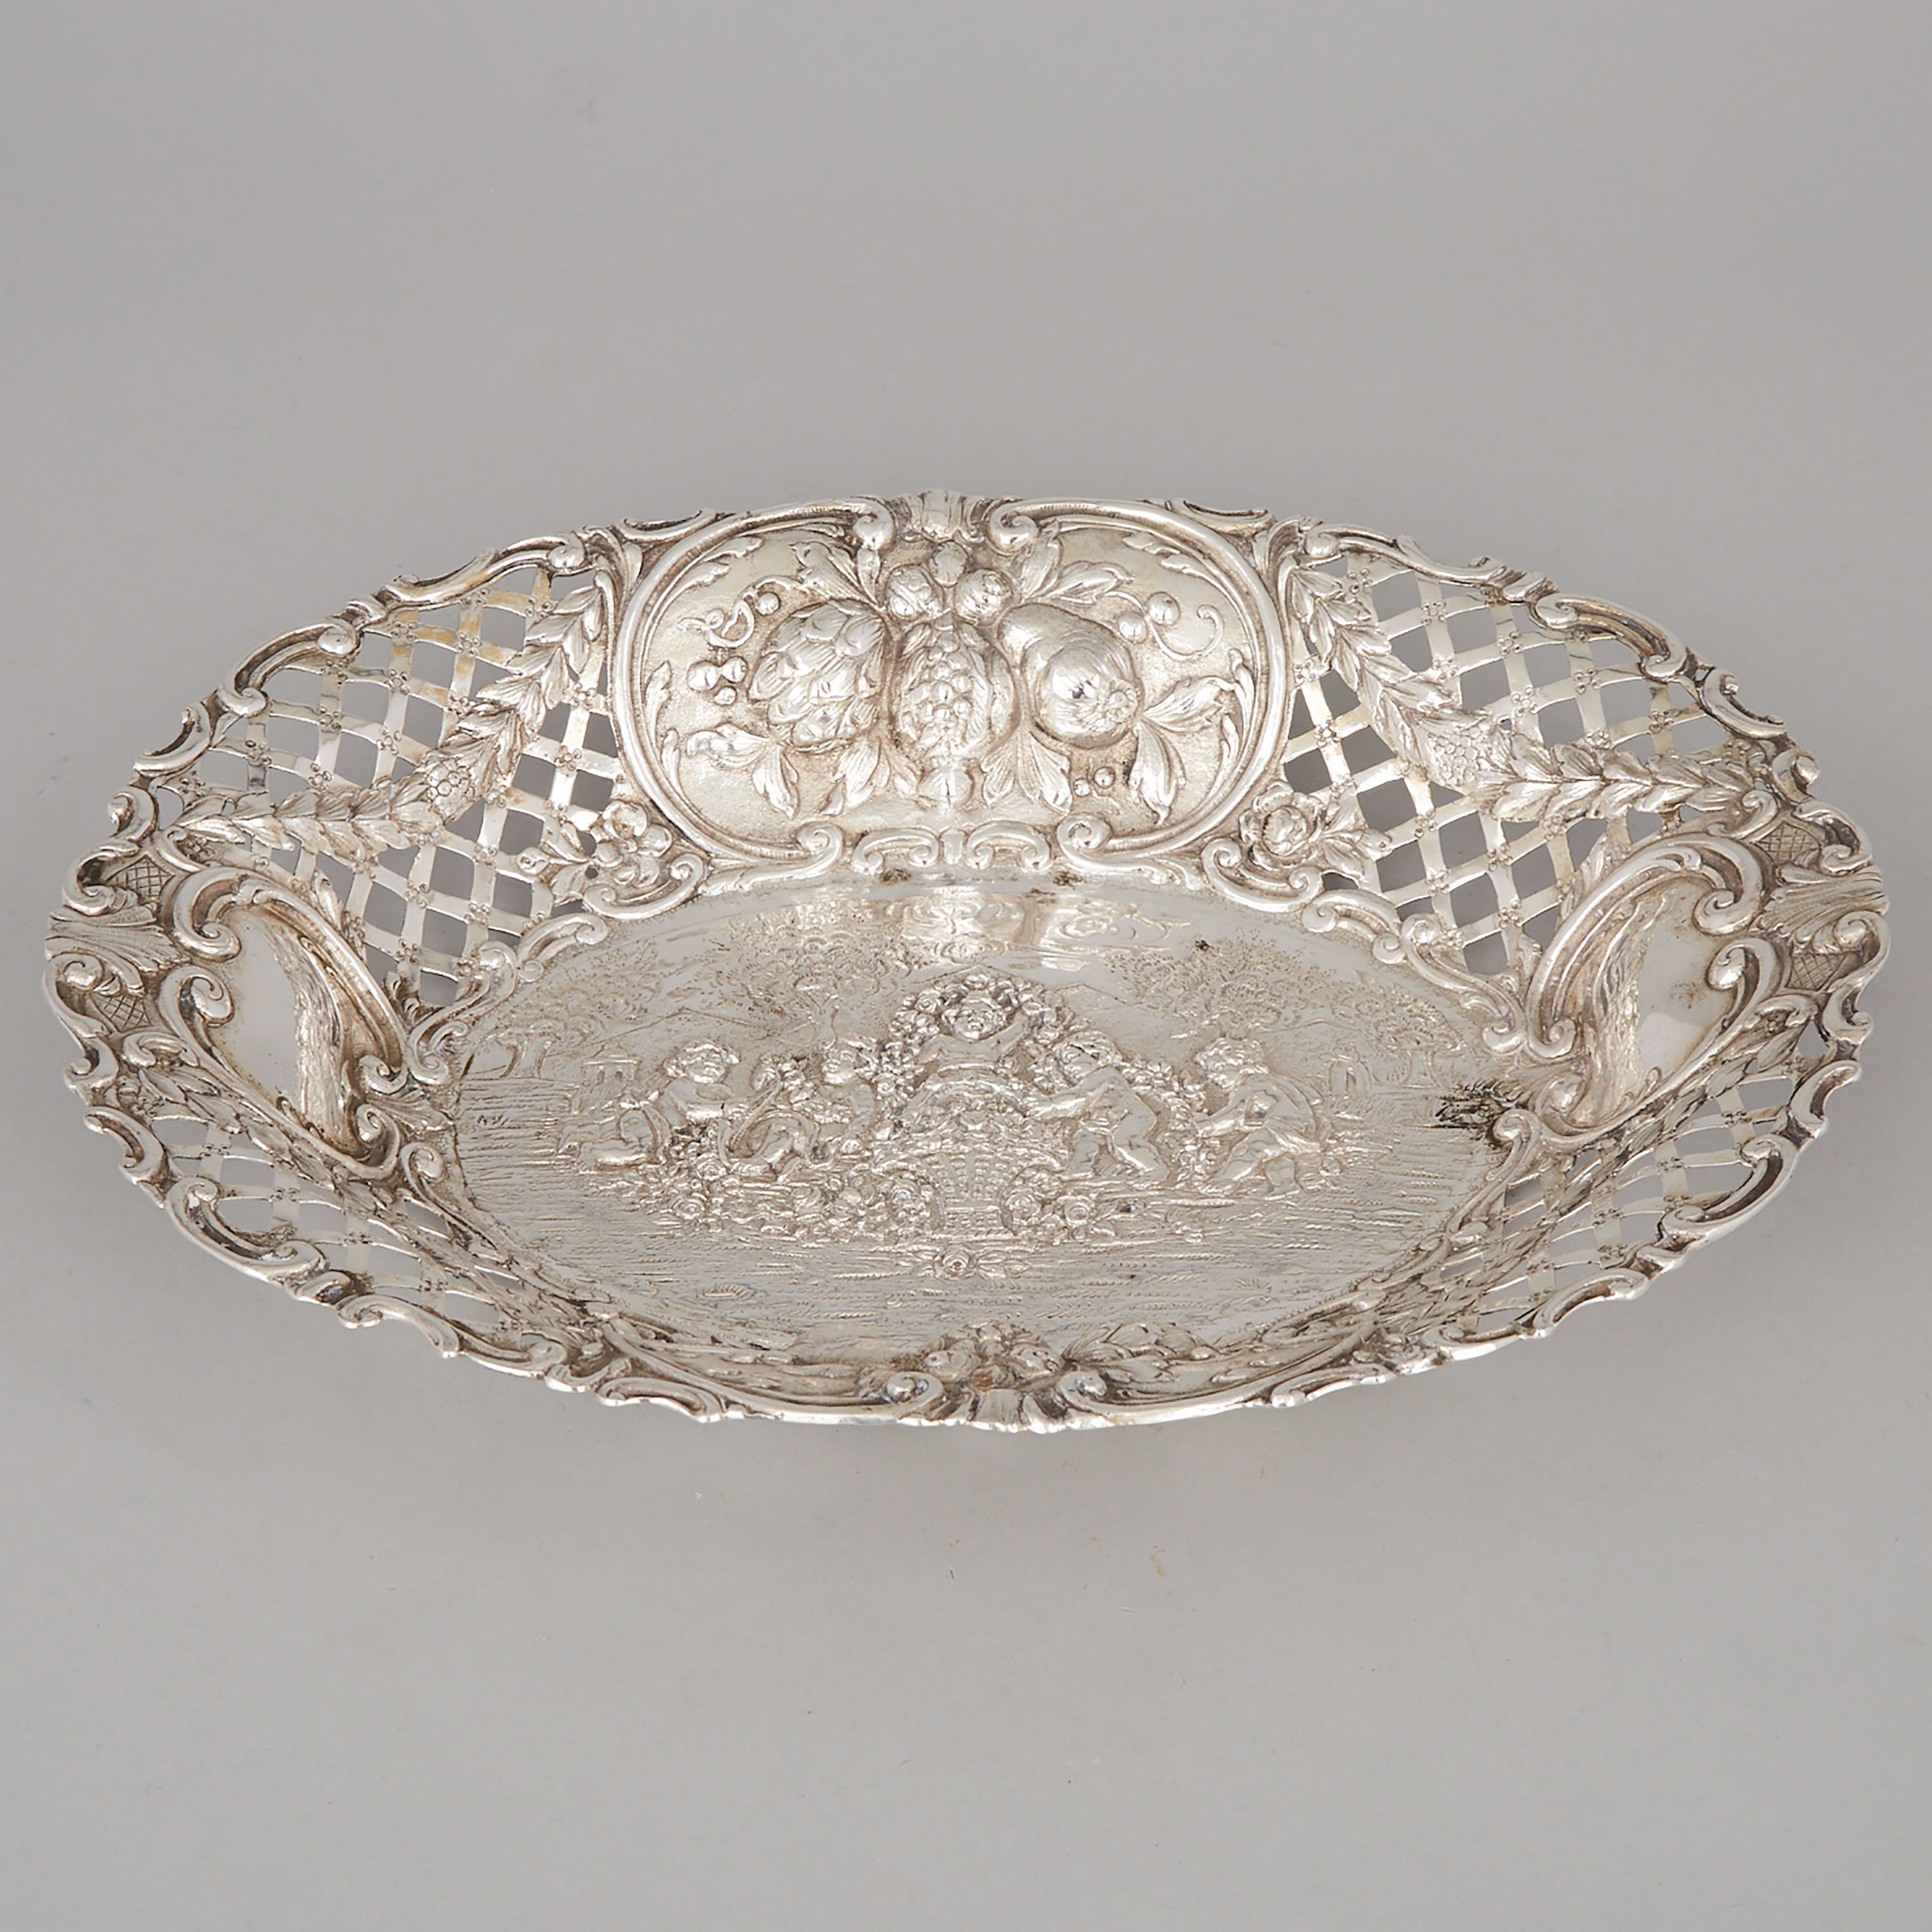 German Silver Oval Basket, early 20th century